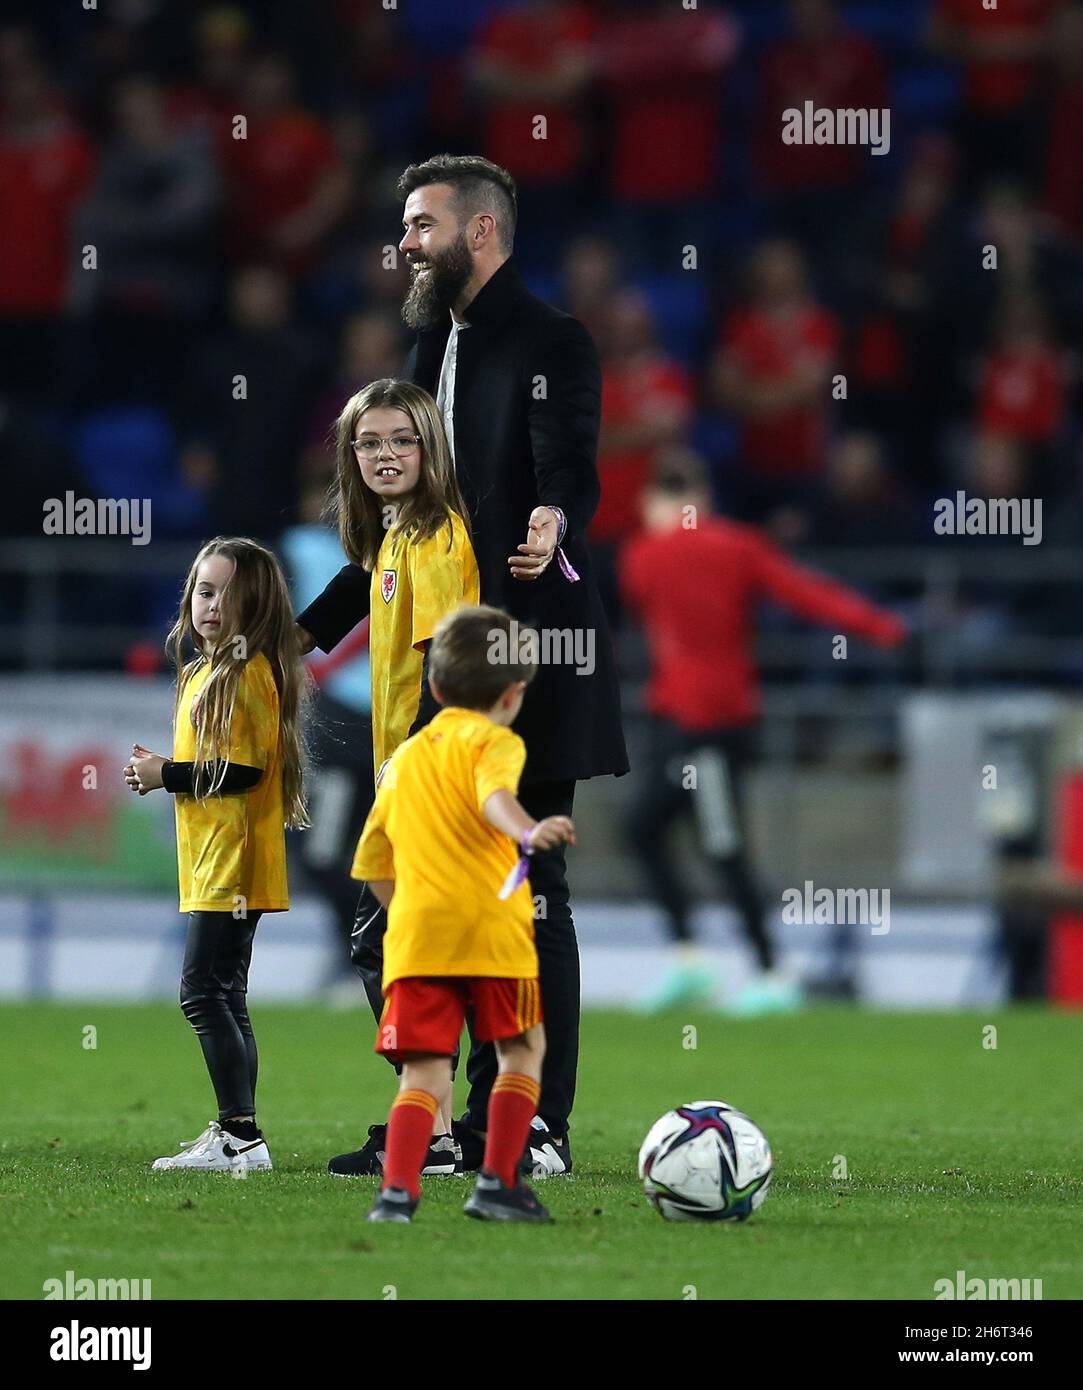 Cardiff, UK. 16th Nov, 2021. Joe Ledley, the Welsh football player on the field with his children at halftime after he announced that he was retiring from football. FIFA World Cup qualifier, group E, Wales v Belgium at the Cardiff city stadium in Cardiff, South Wales on Tuesday 16th November 2021. Editorial use only. pic by Andrew Orchard/Andrew Orchard sports photography/Alamy Live News Credit: Andrew Orchard sports photography/Alamy Live News Stock Photo